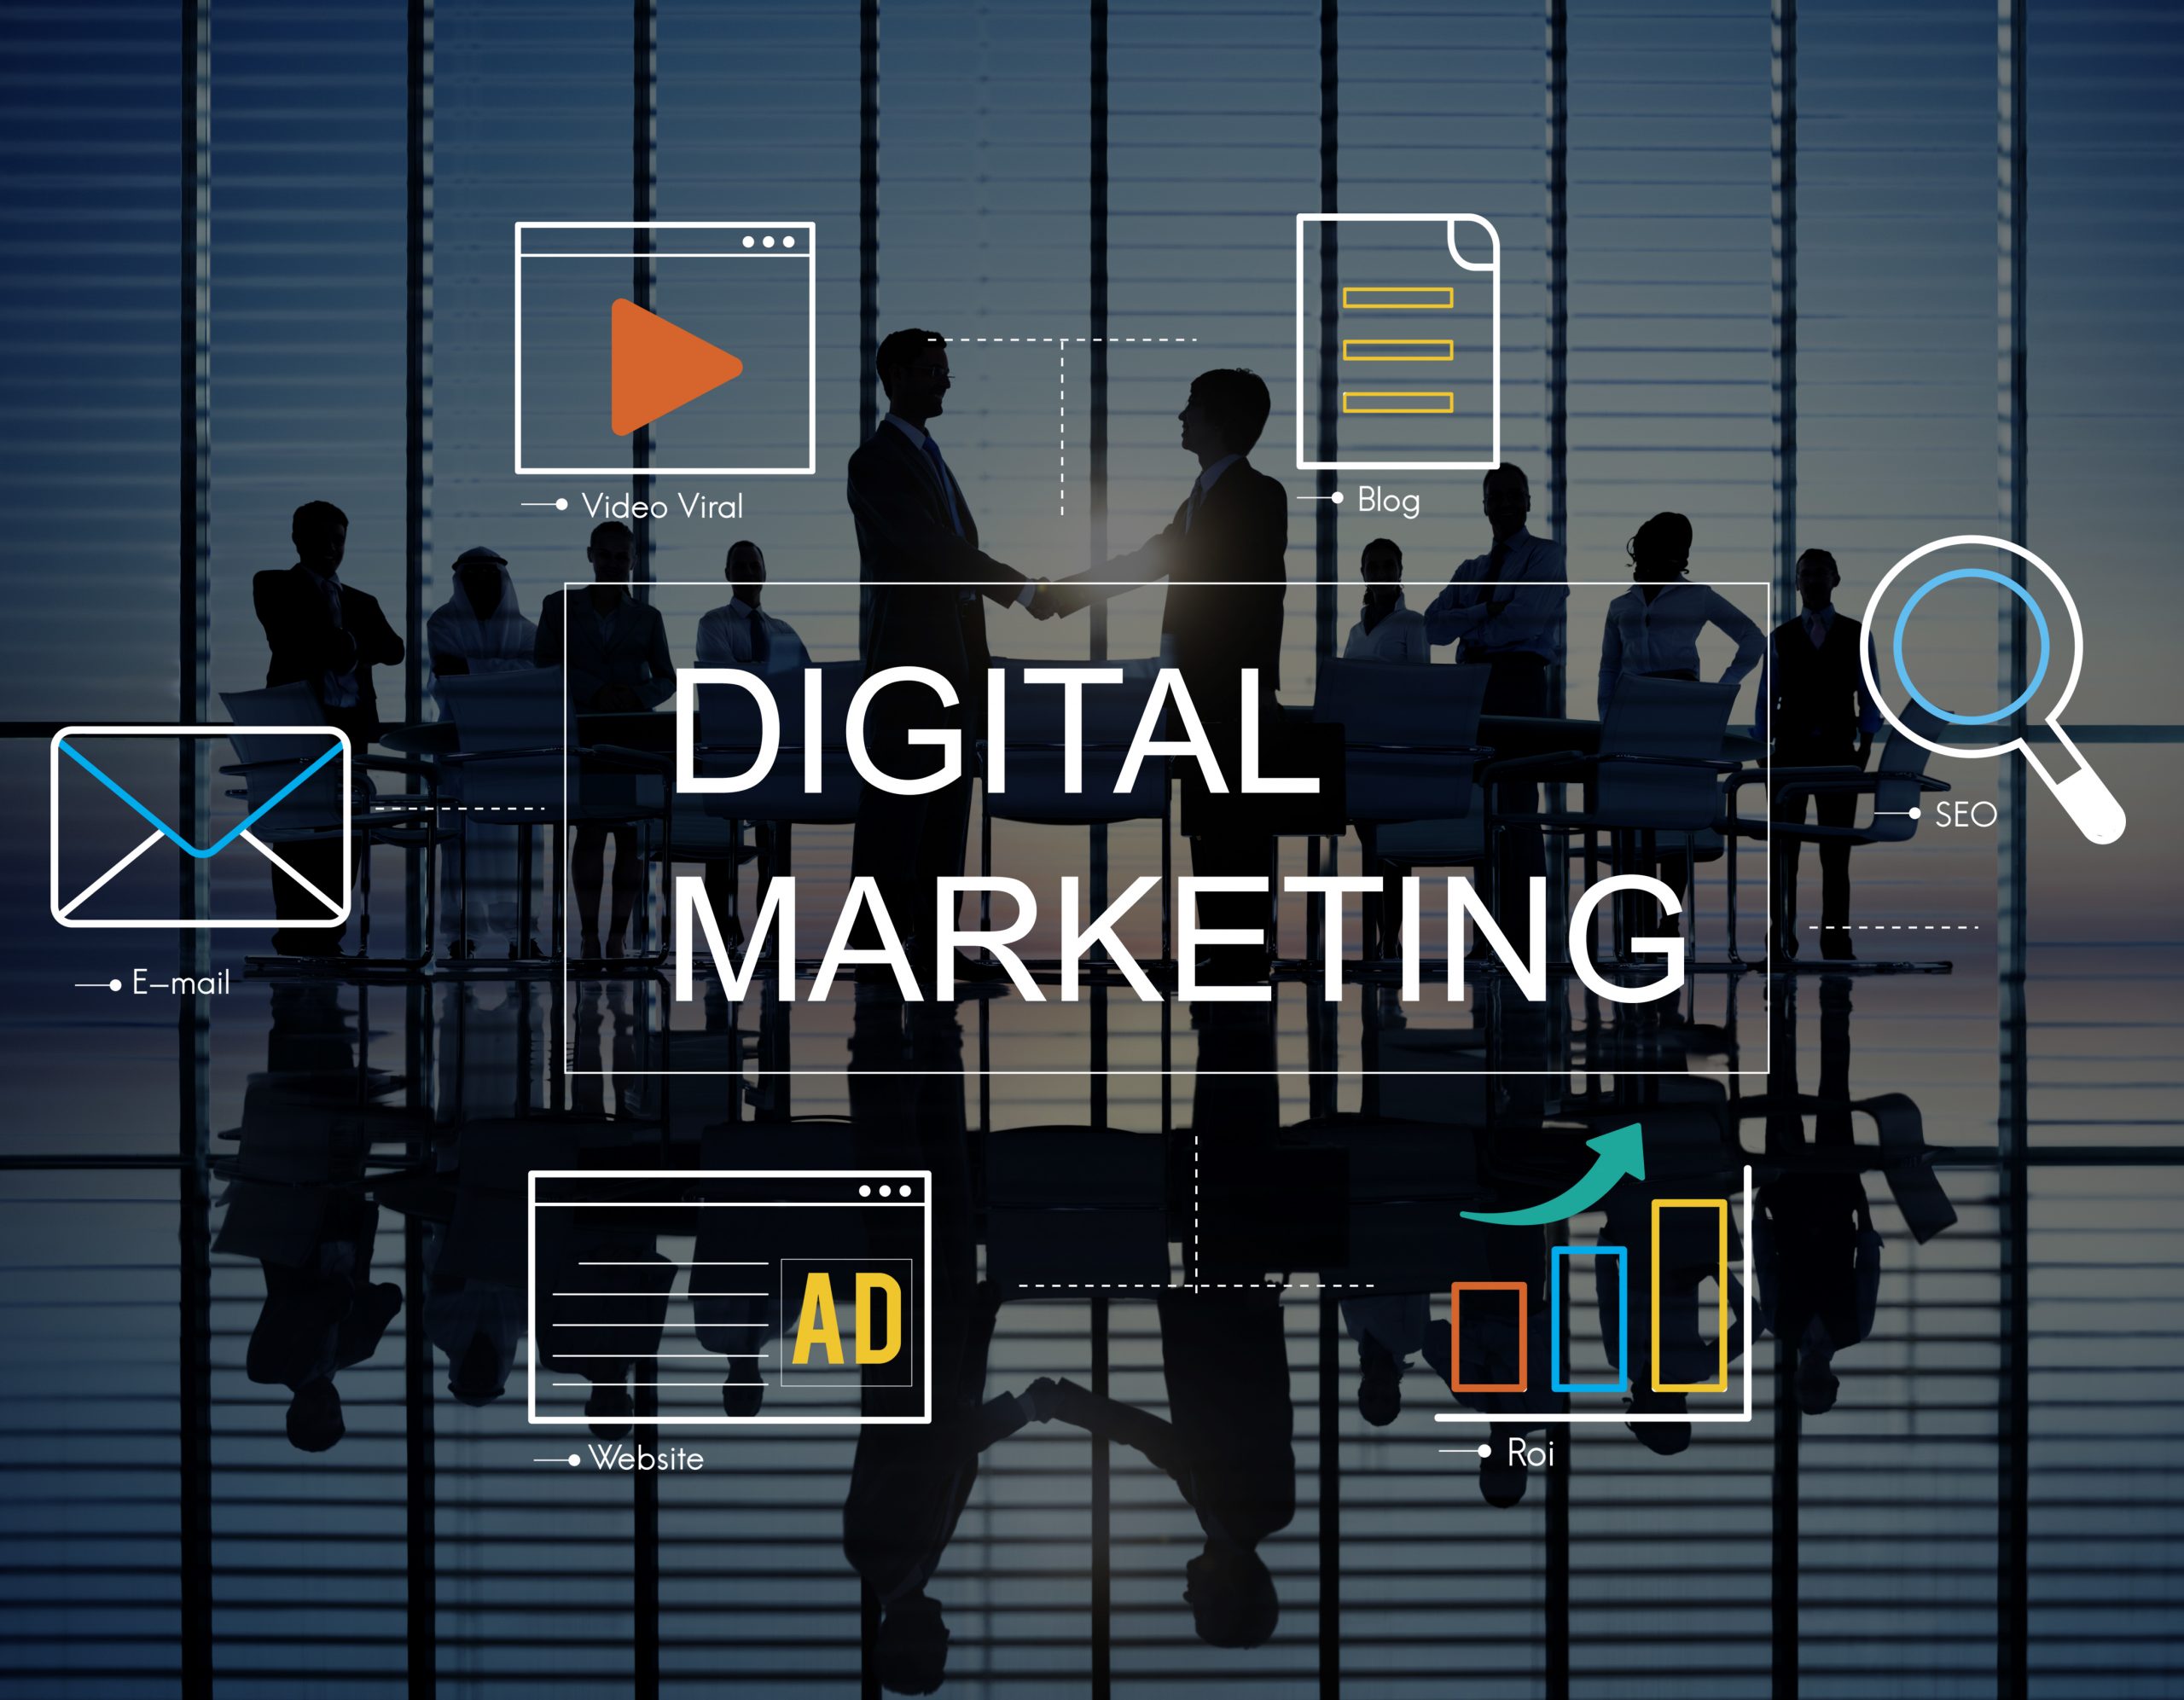 How Digital Marketing Reshapes The Future Of Popular Business Industries?